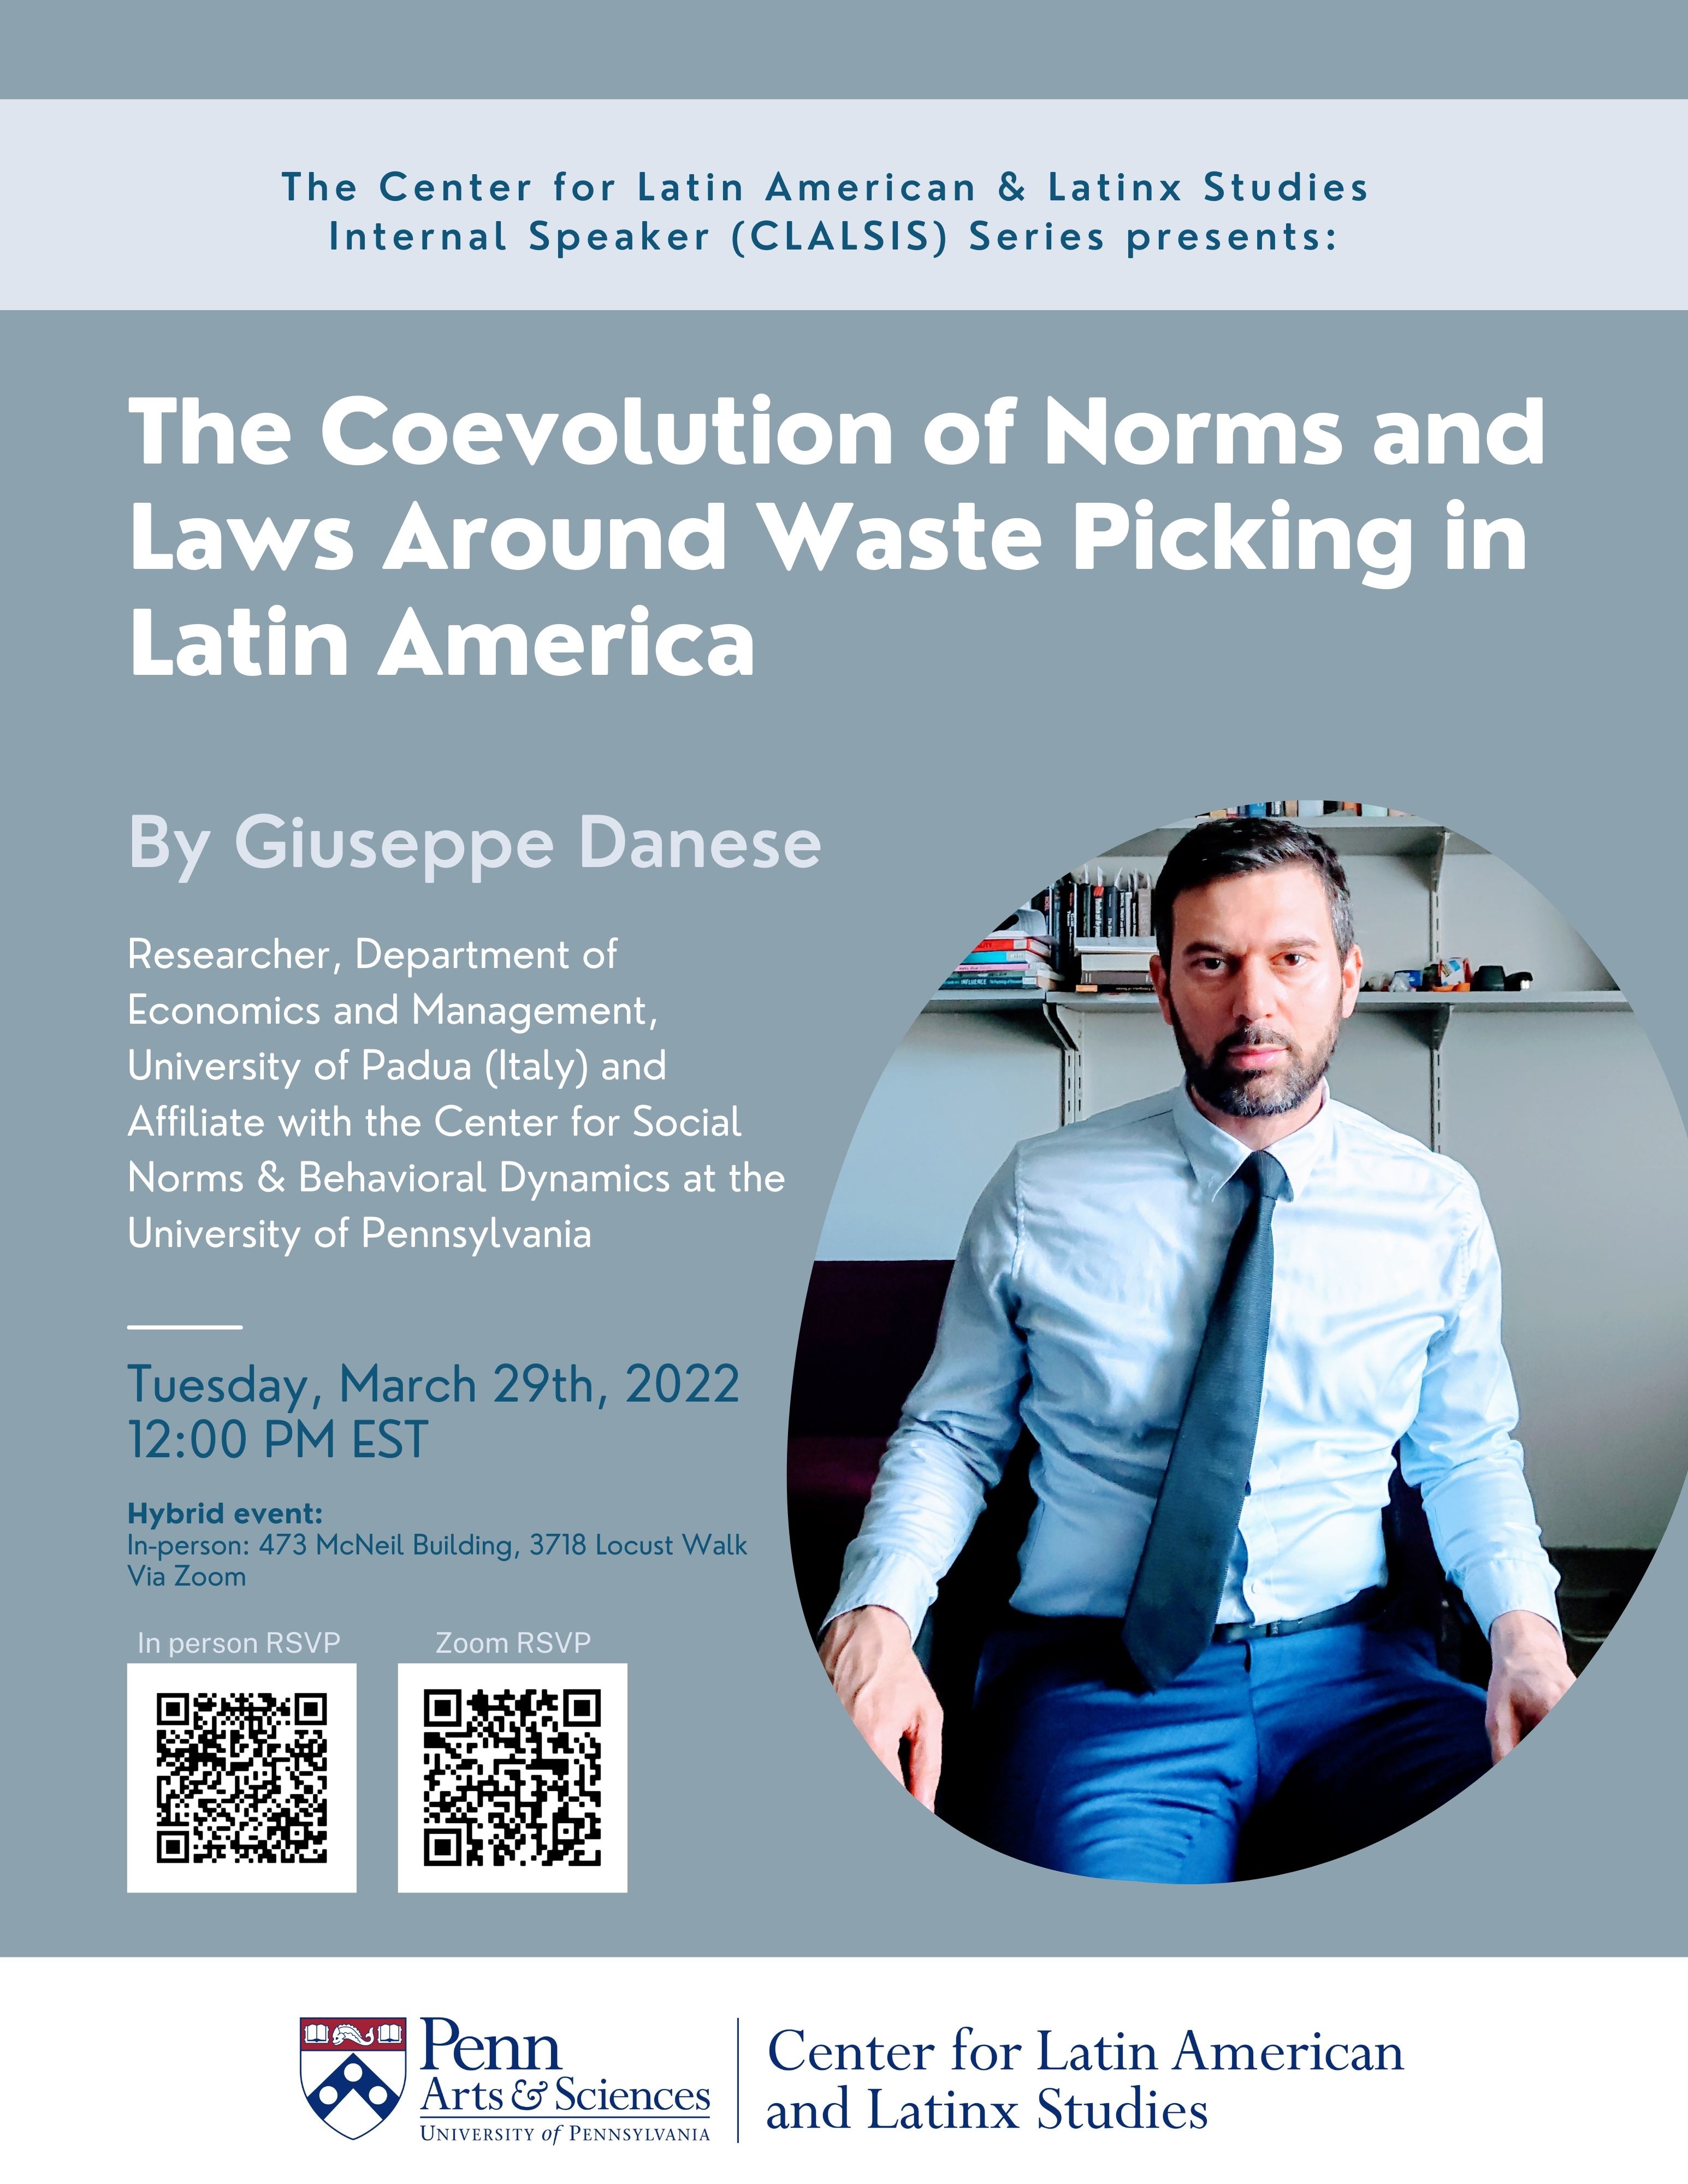 Giuseppe Danese, Affiliated with The Center for Norms & Behavioral Dynamics at the University of Pennsylvania: “The coevolution of norms and laws around waste picking in Latin America”